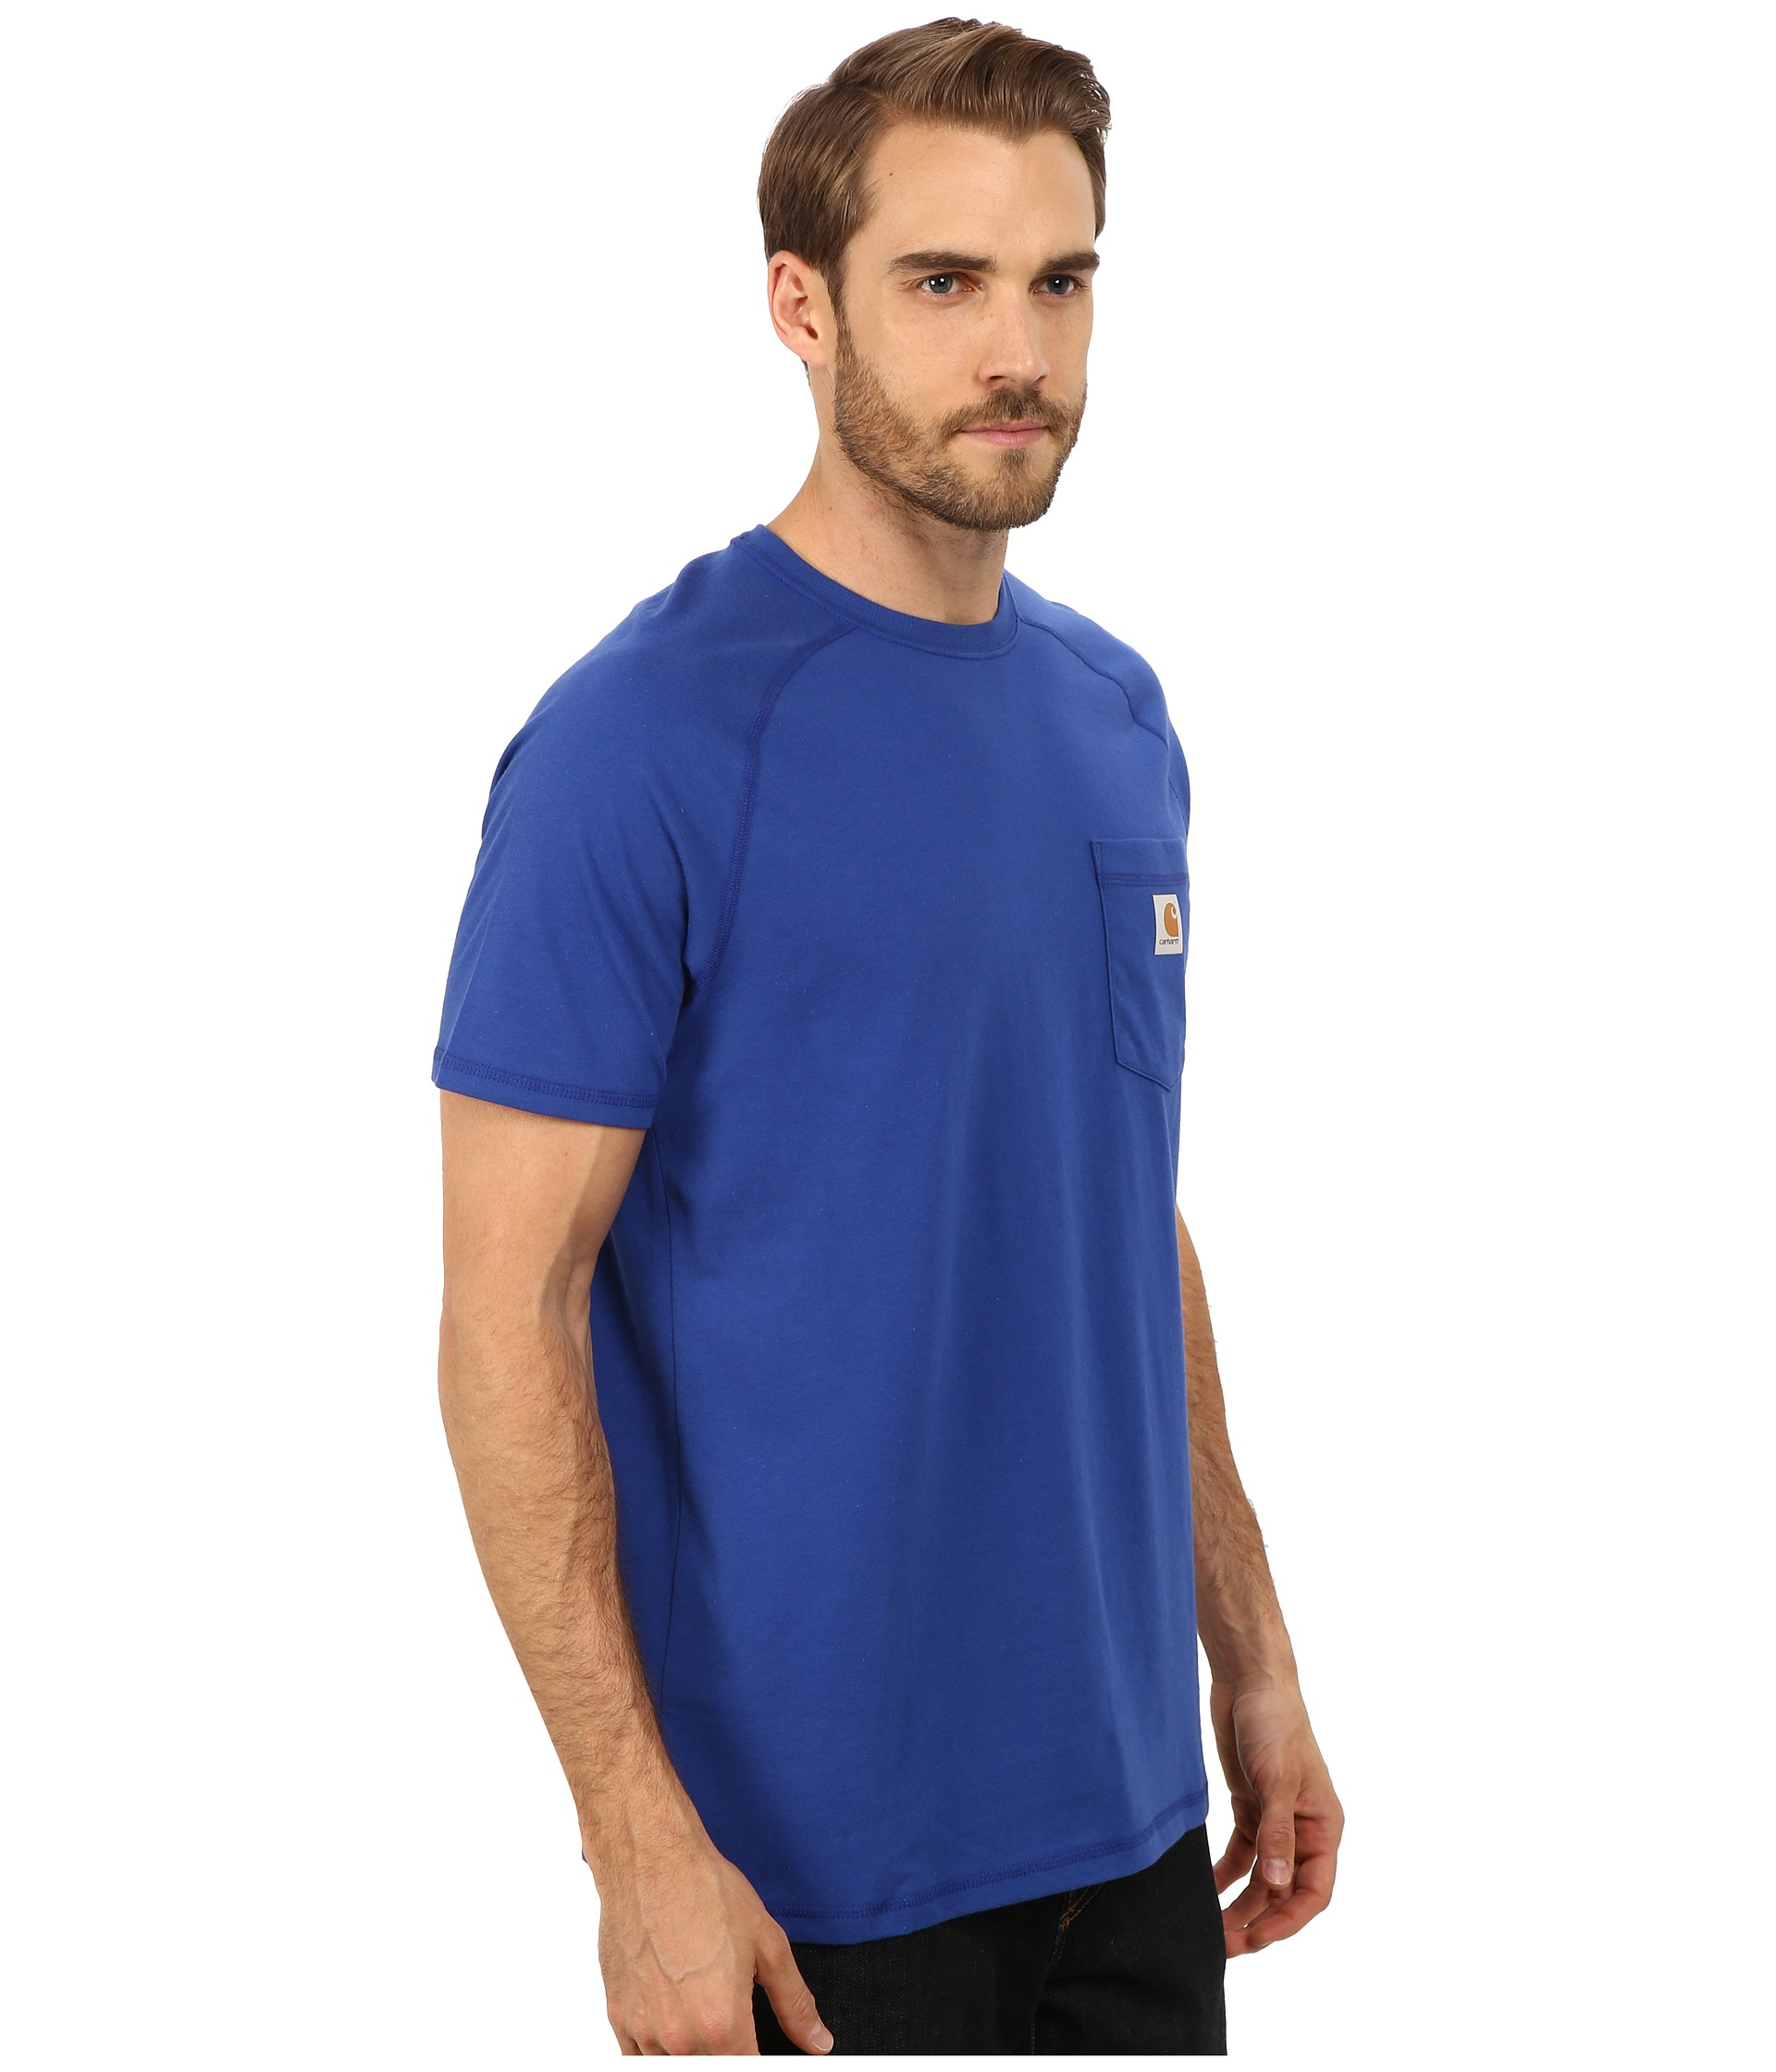 Carhartt Force Cotton S/s T-shirt in Blue for Men - Lyst